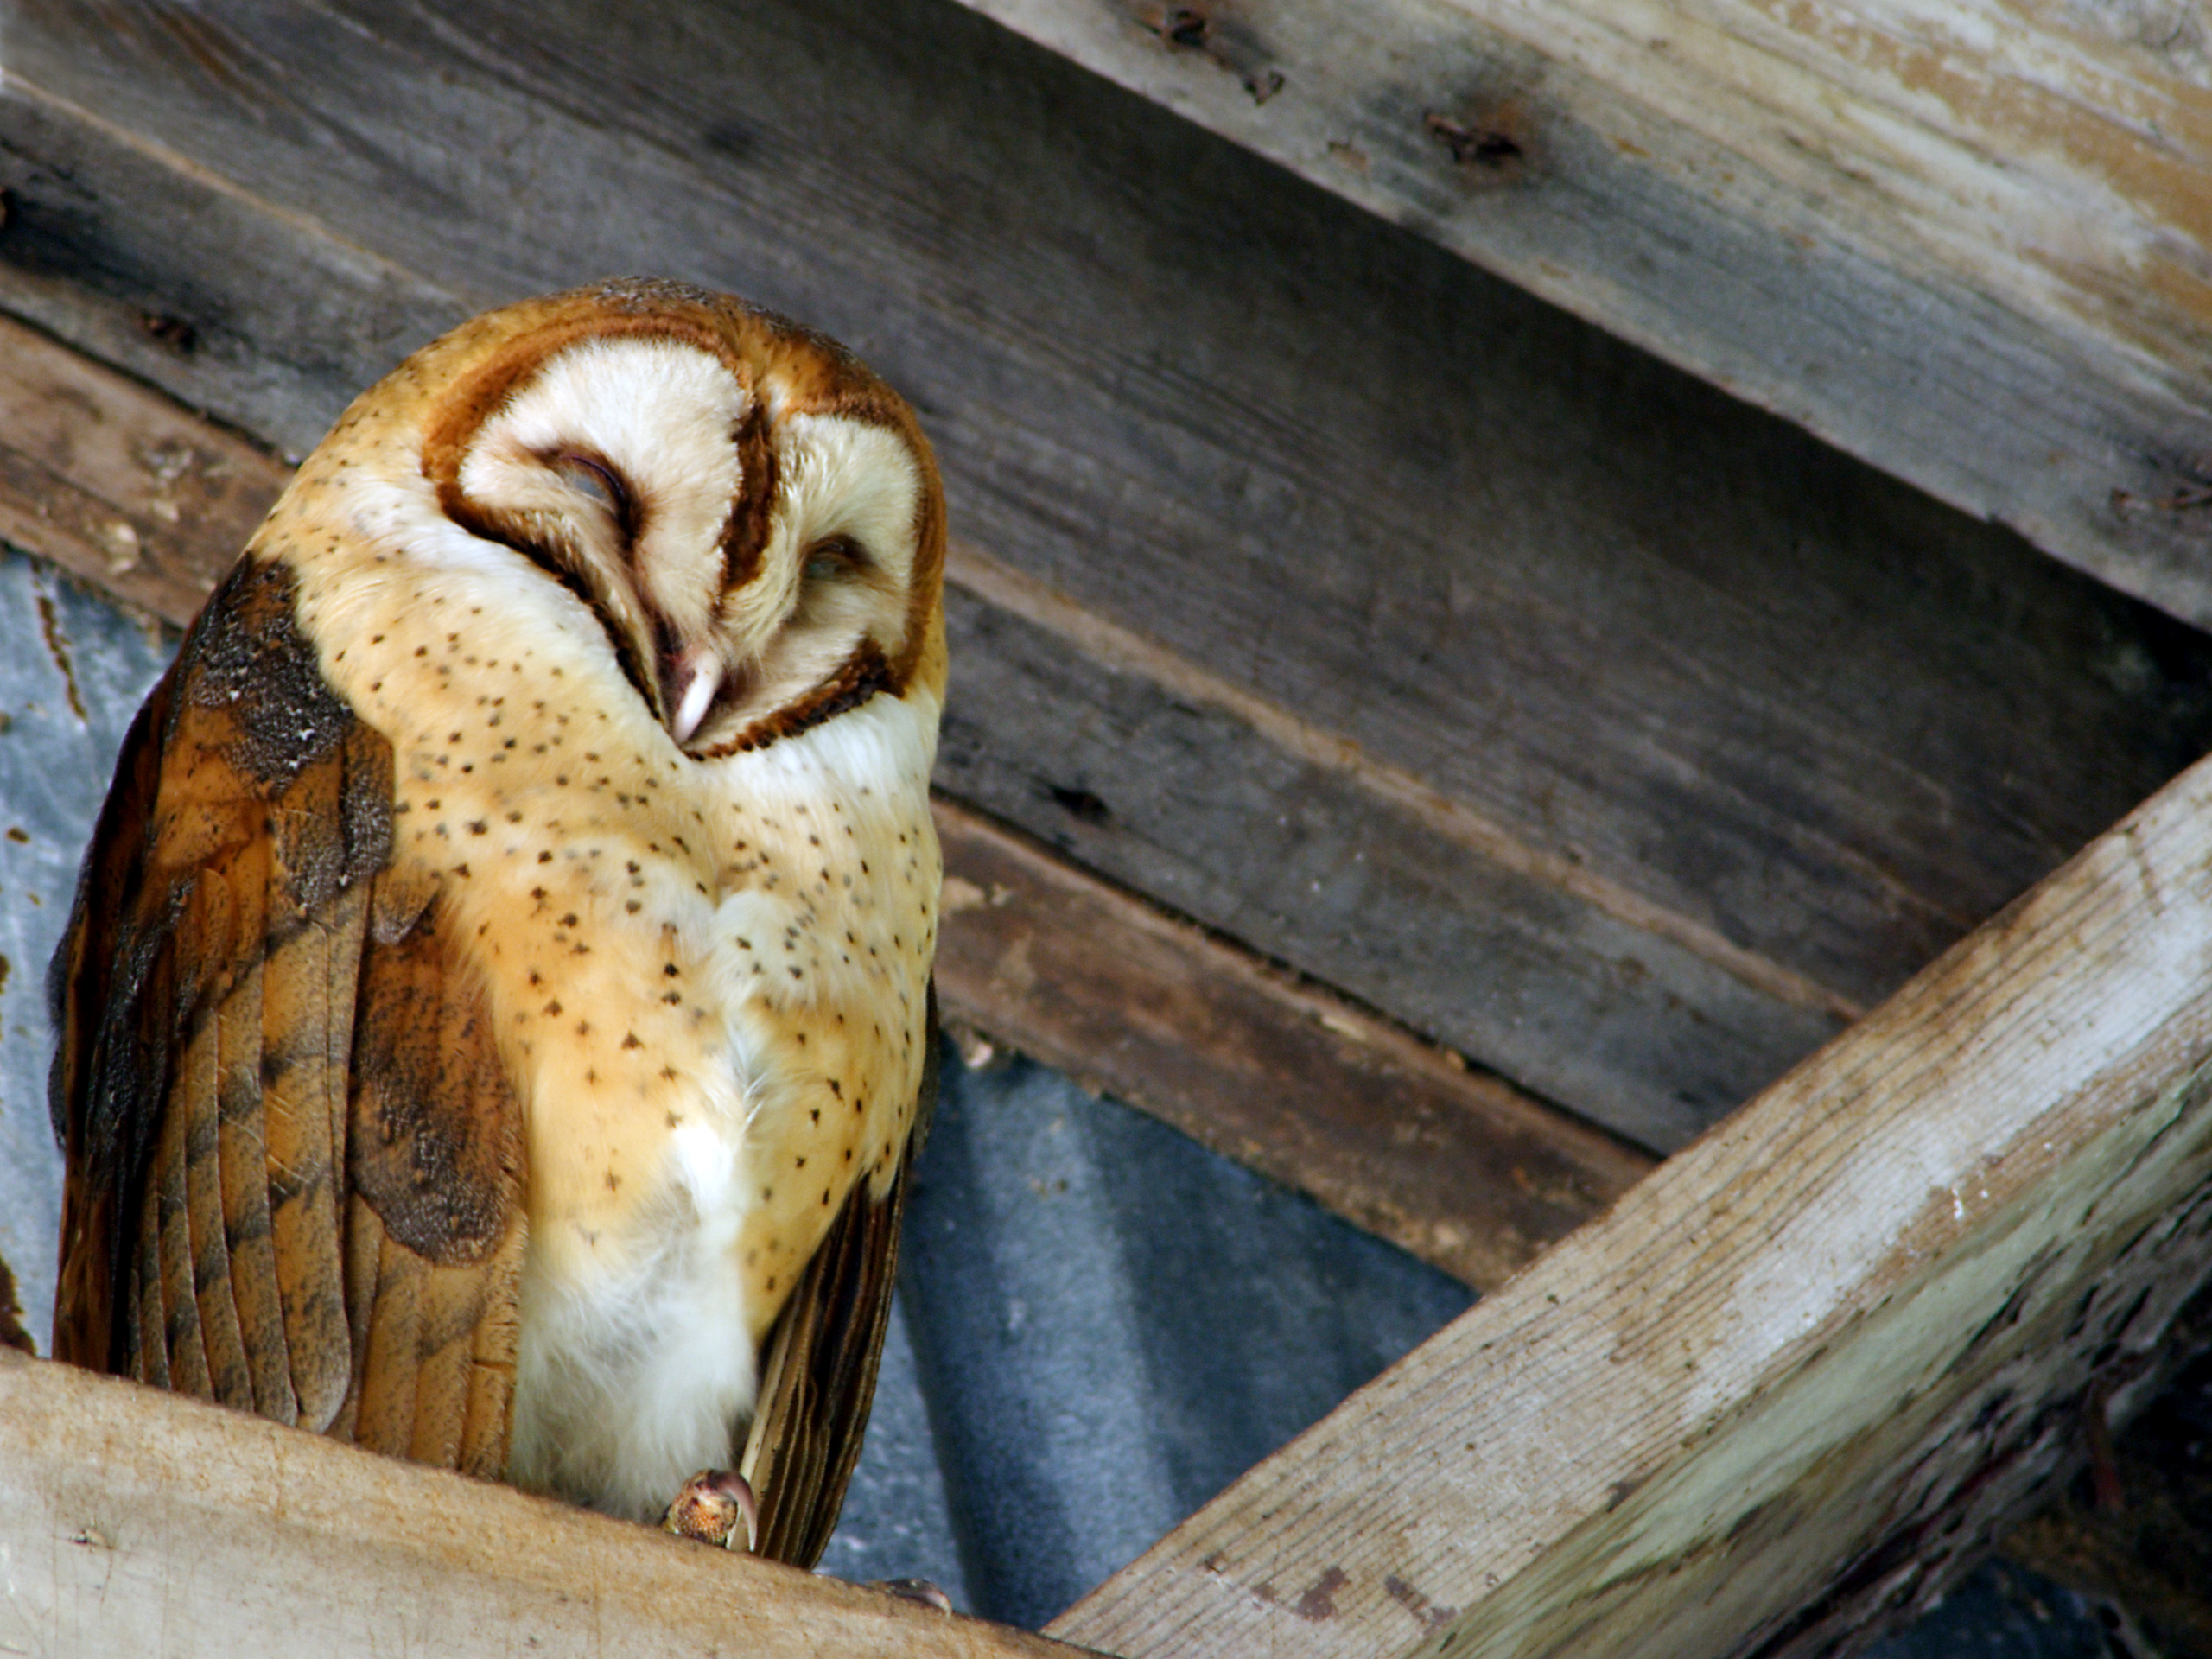 Barn owl perches on the rafters of a building